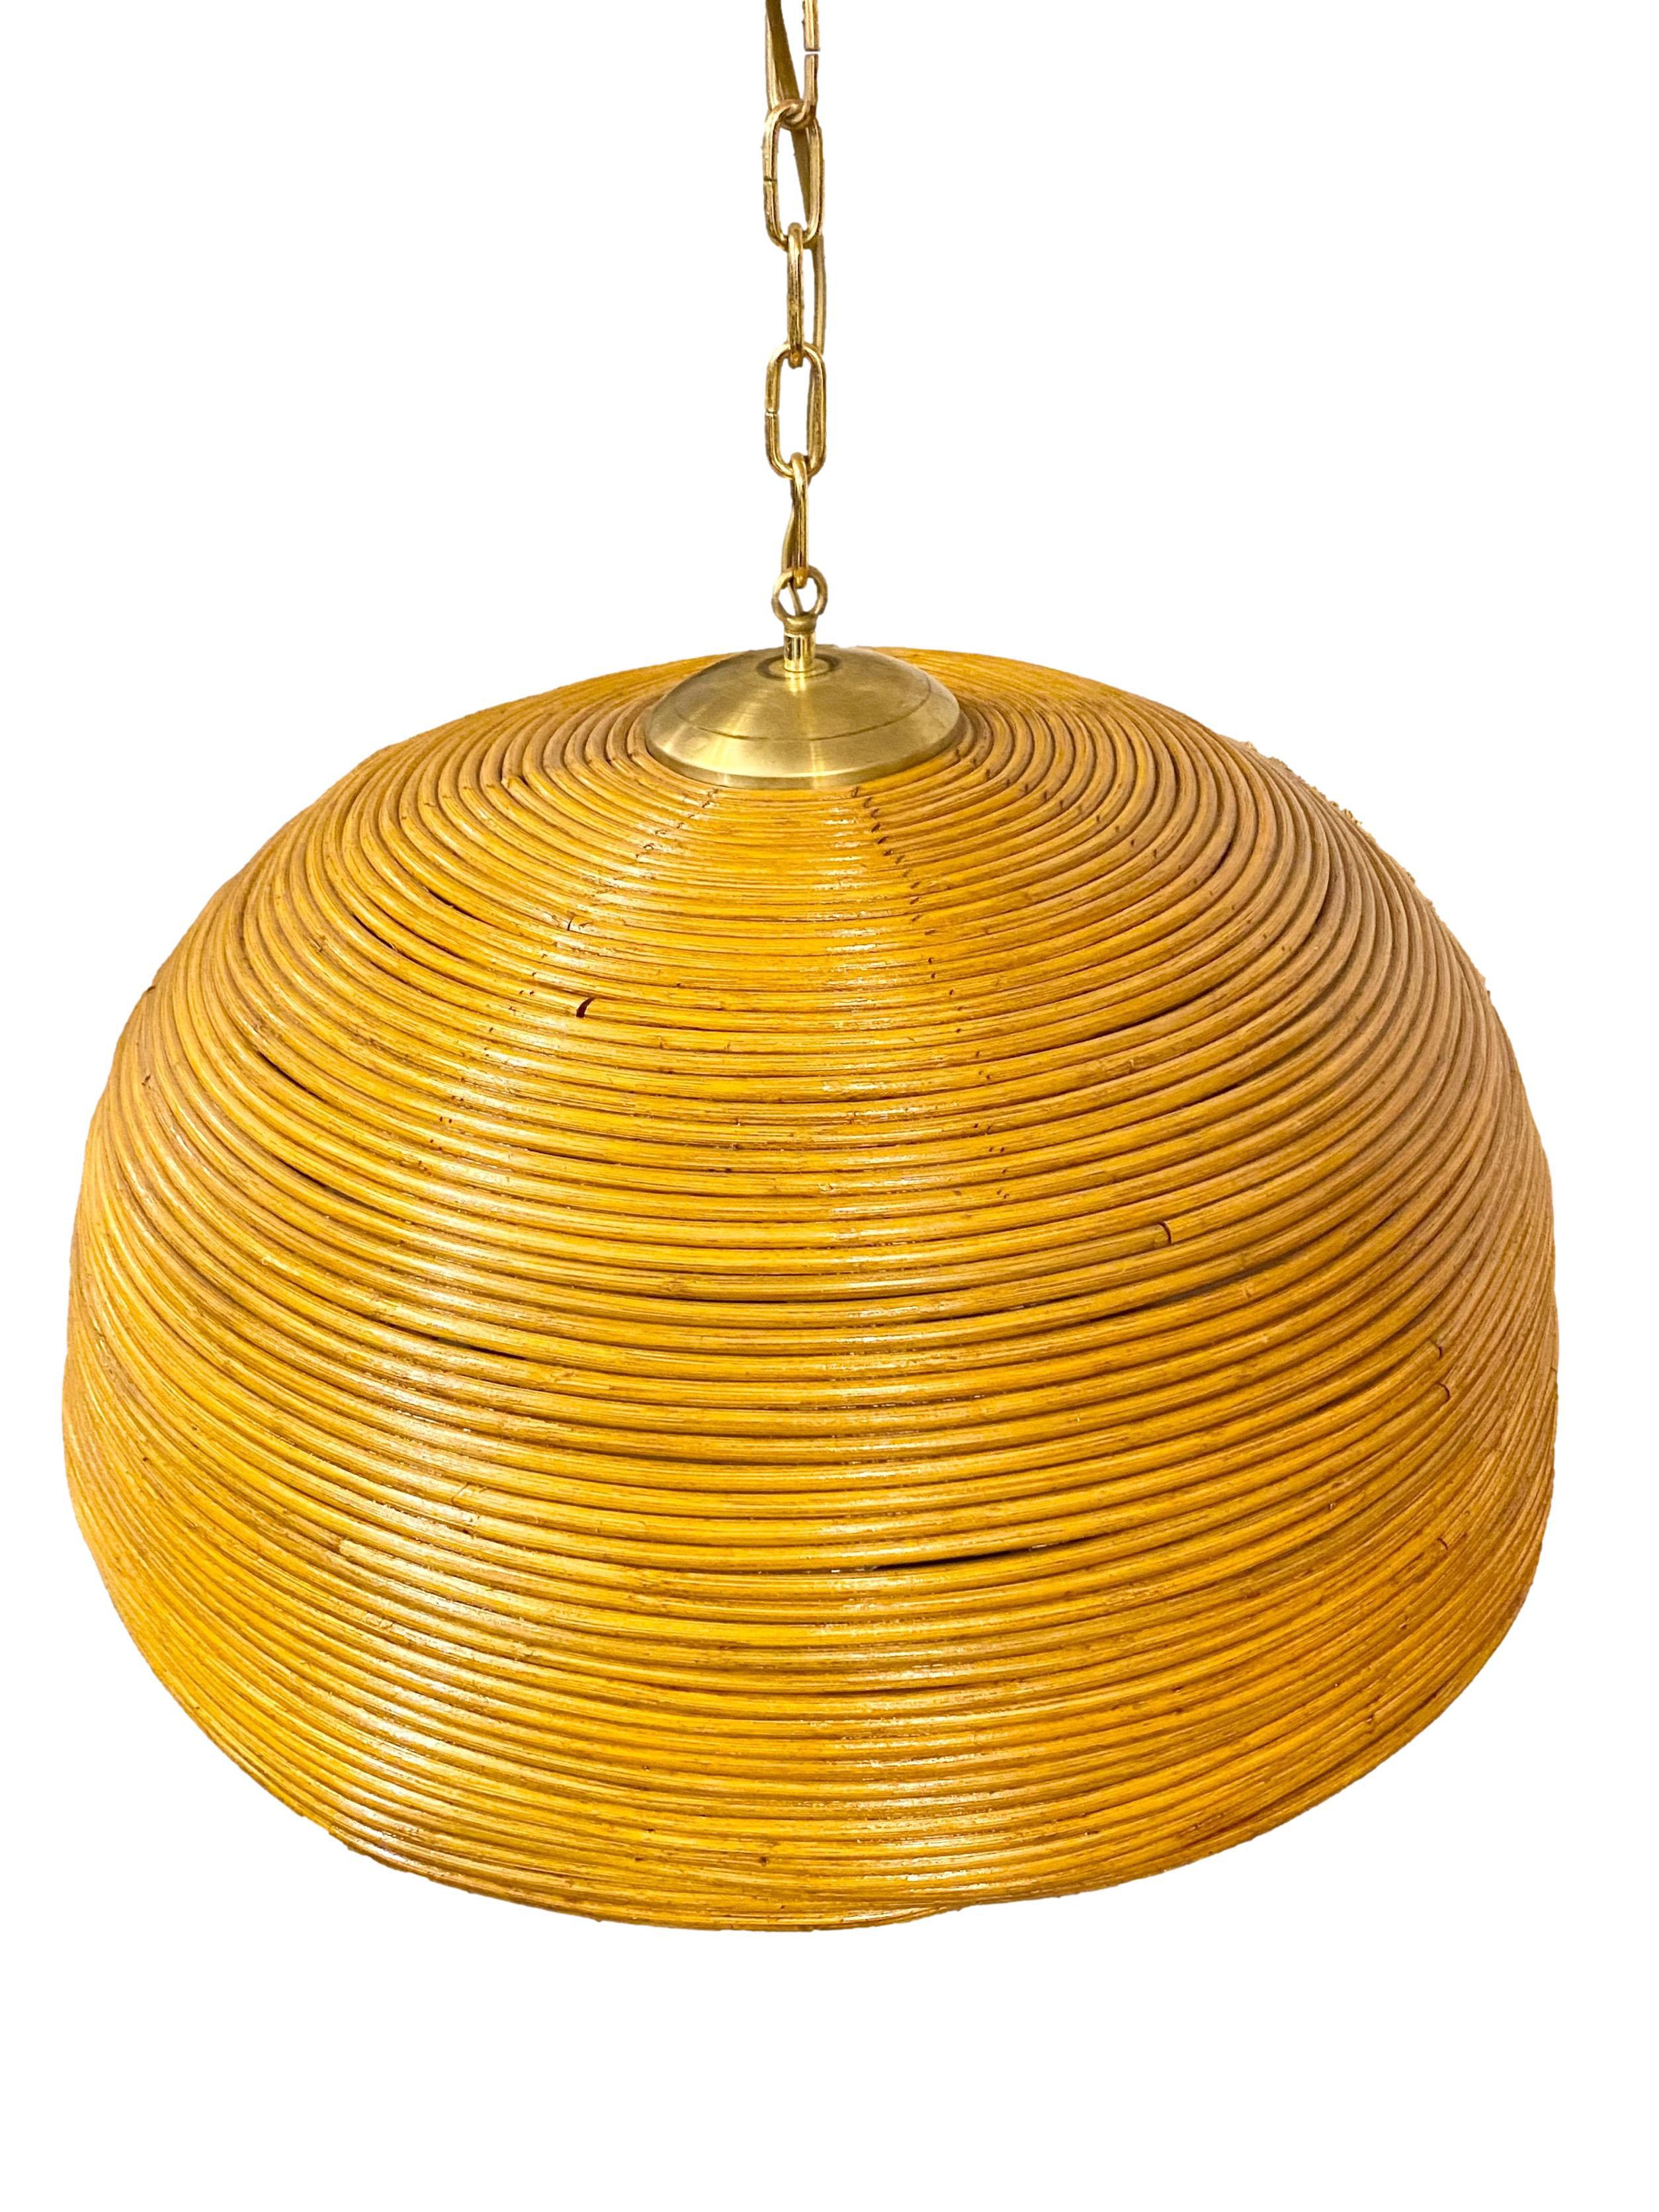 Mid-Century Modern Gabriella Crespi Style Rattan Dome Shaped Pendant Hanging Light, Italy, 1960s 